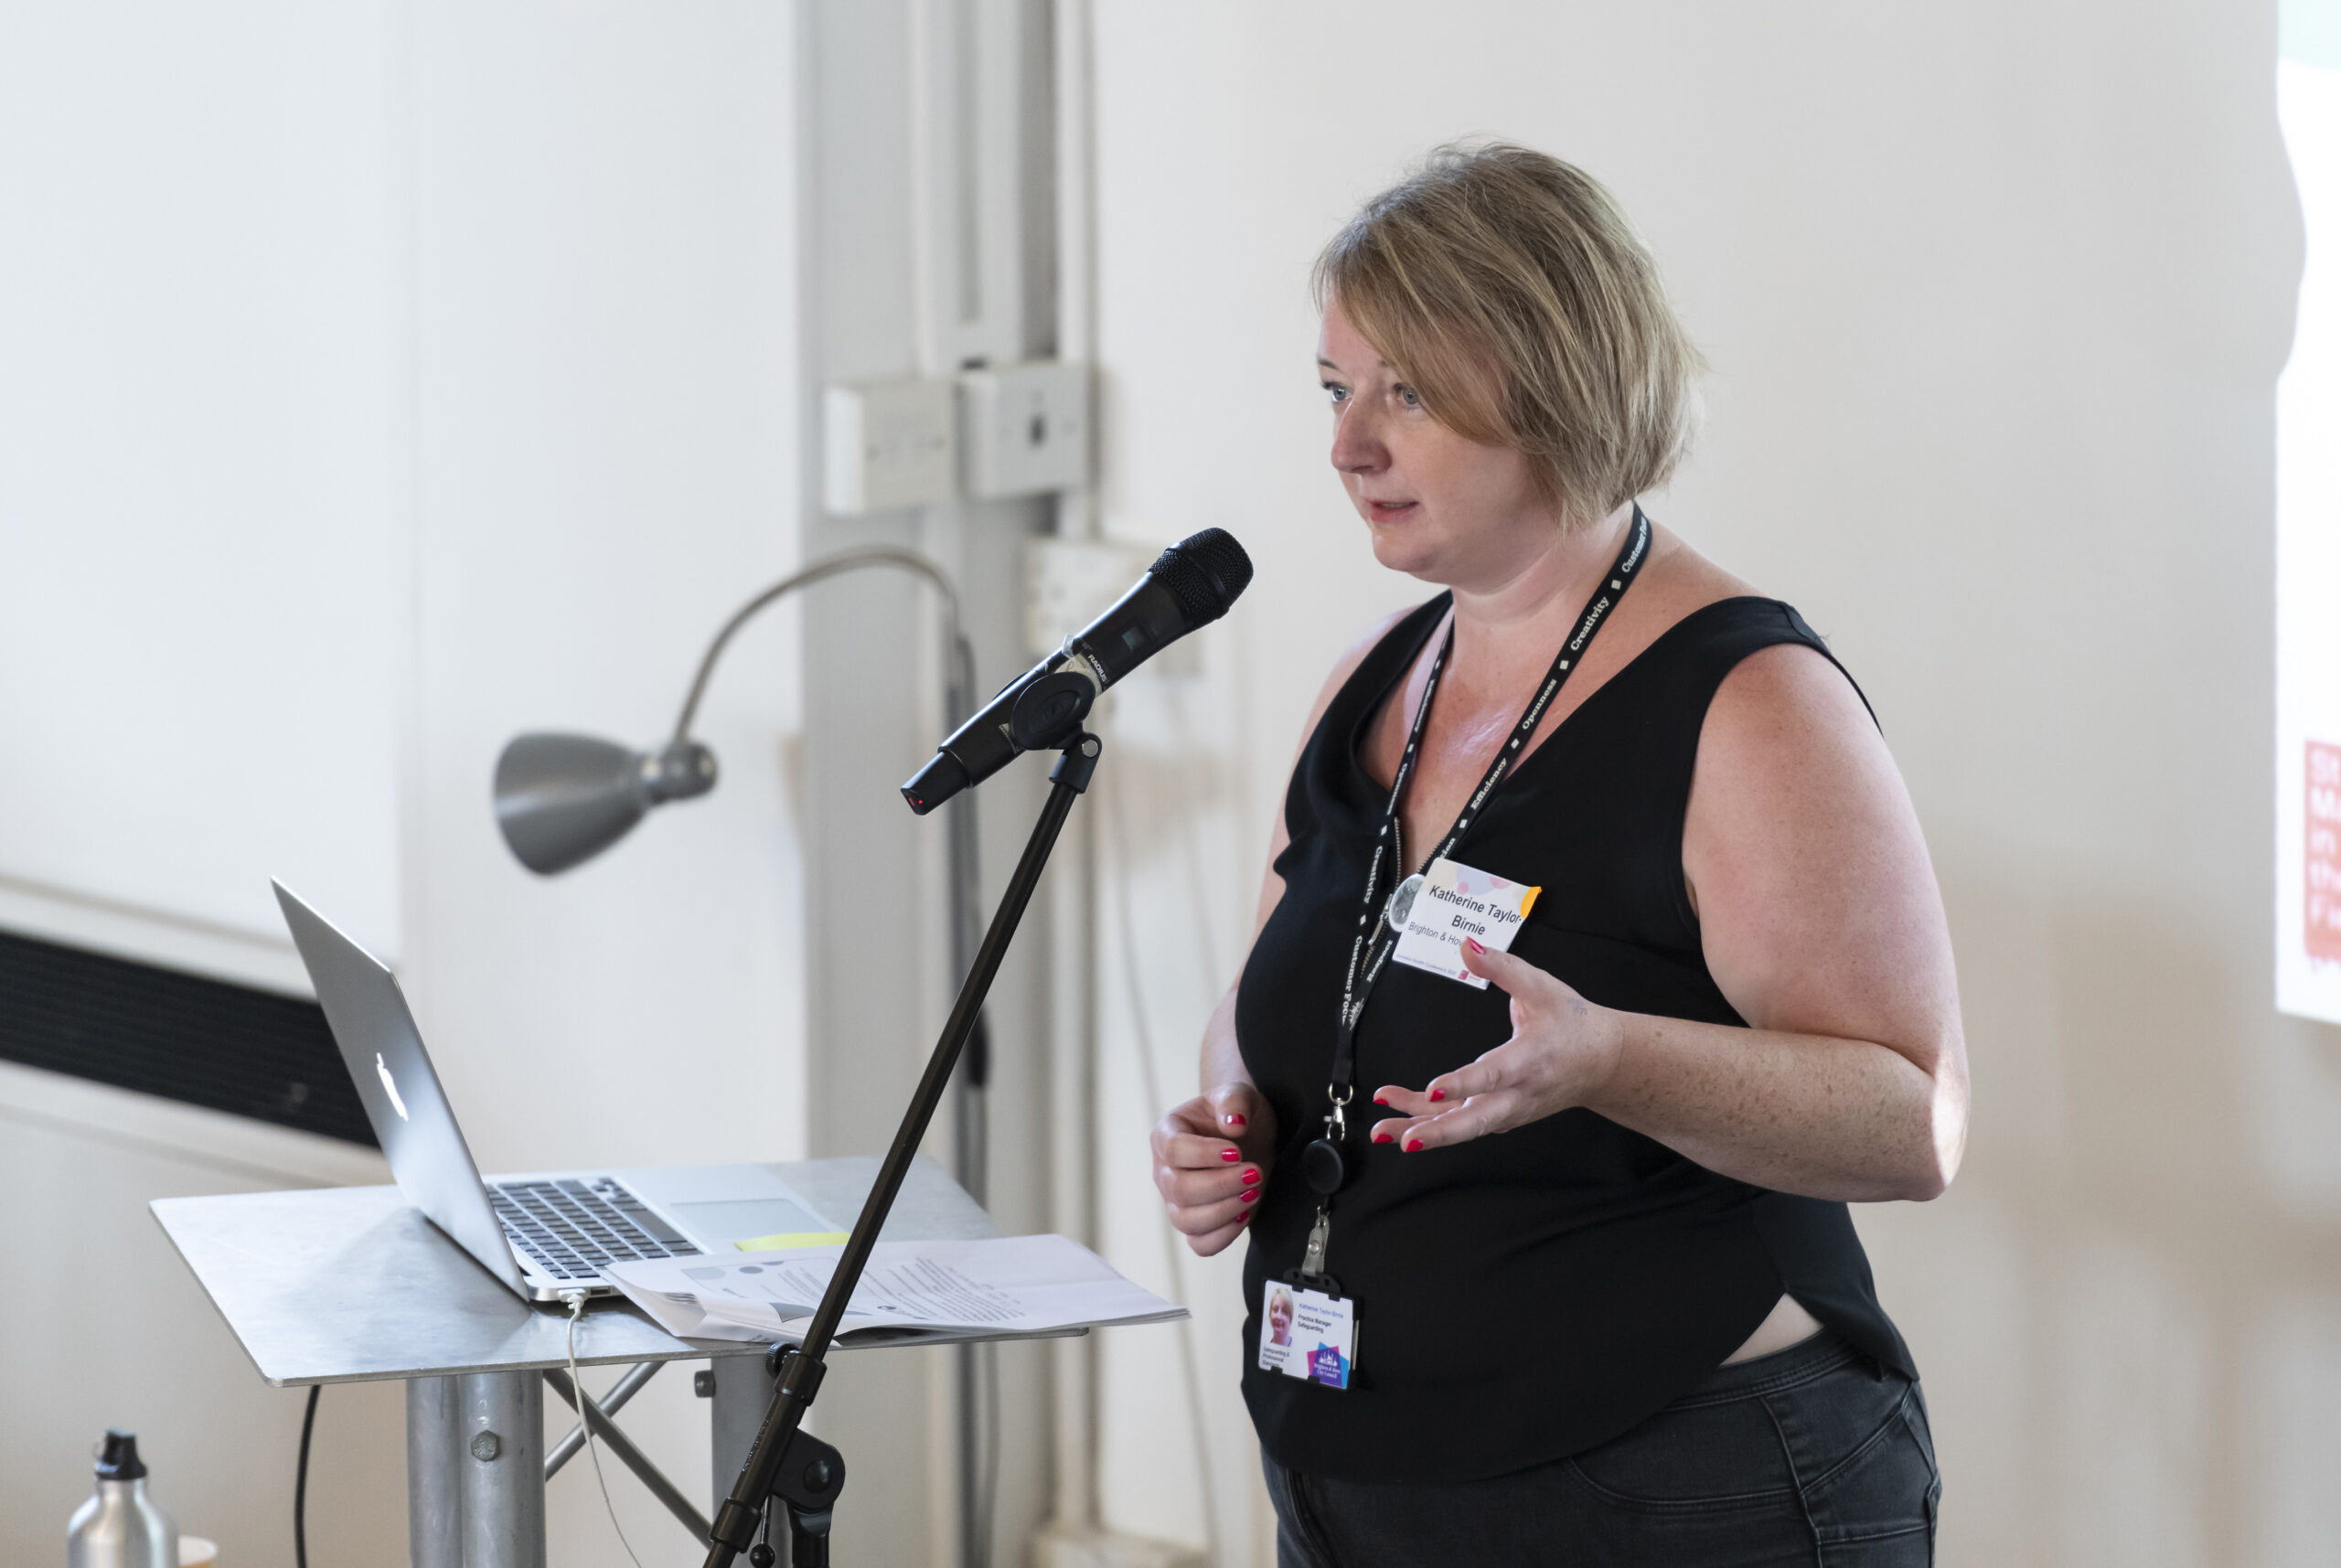 An expert speaker delivers a talk on safeguarding at the 2022 Homeless Health conference